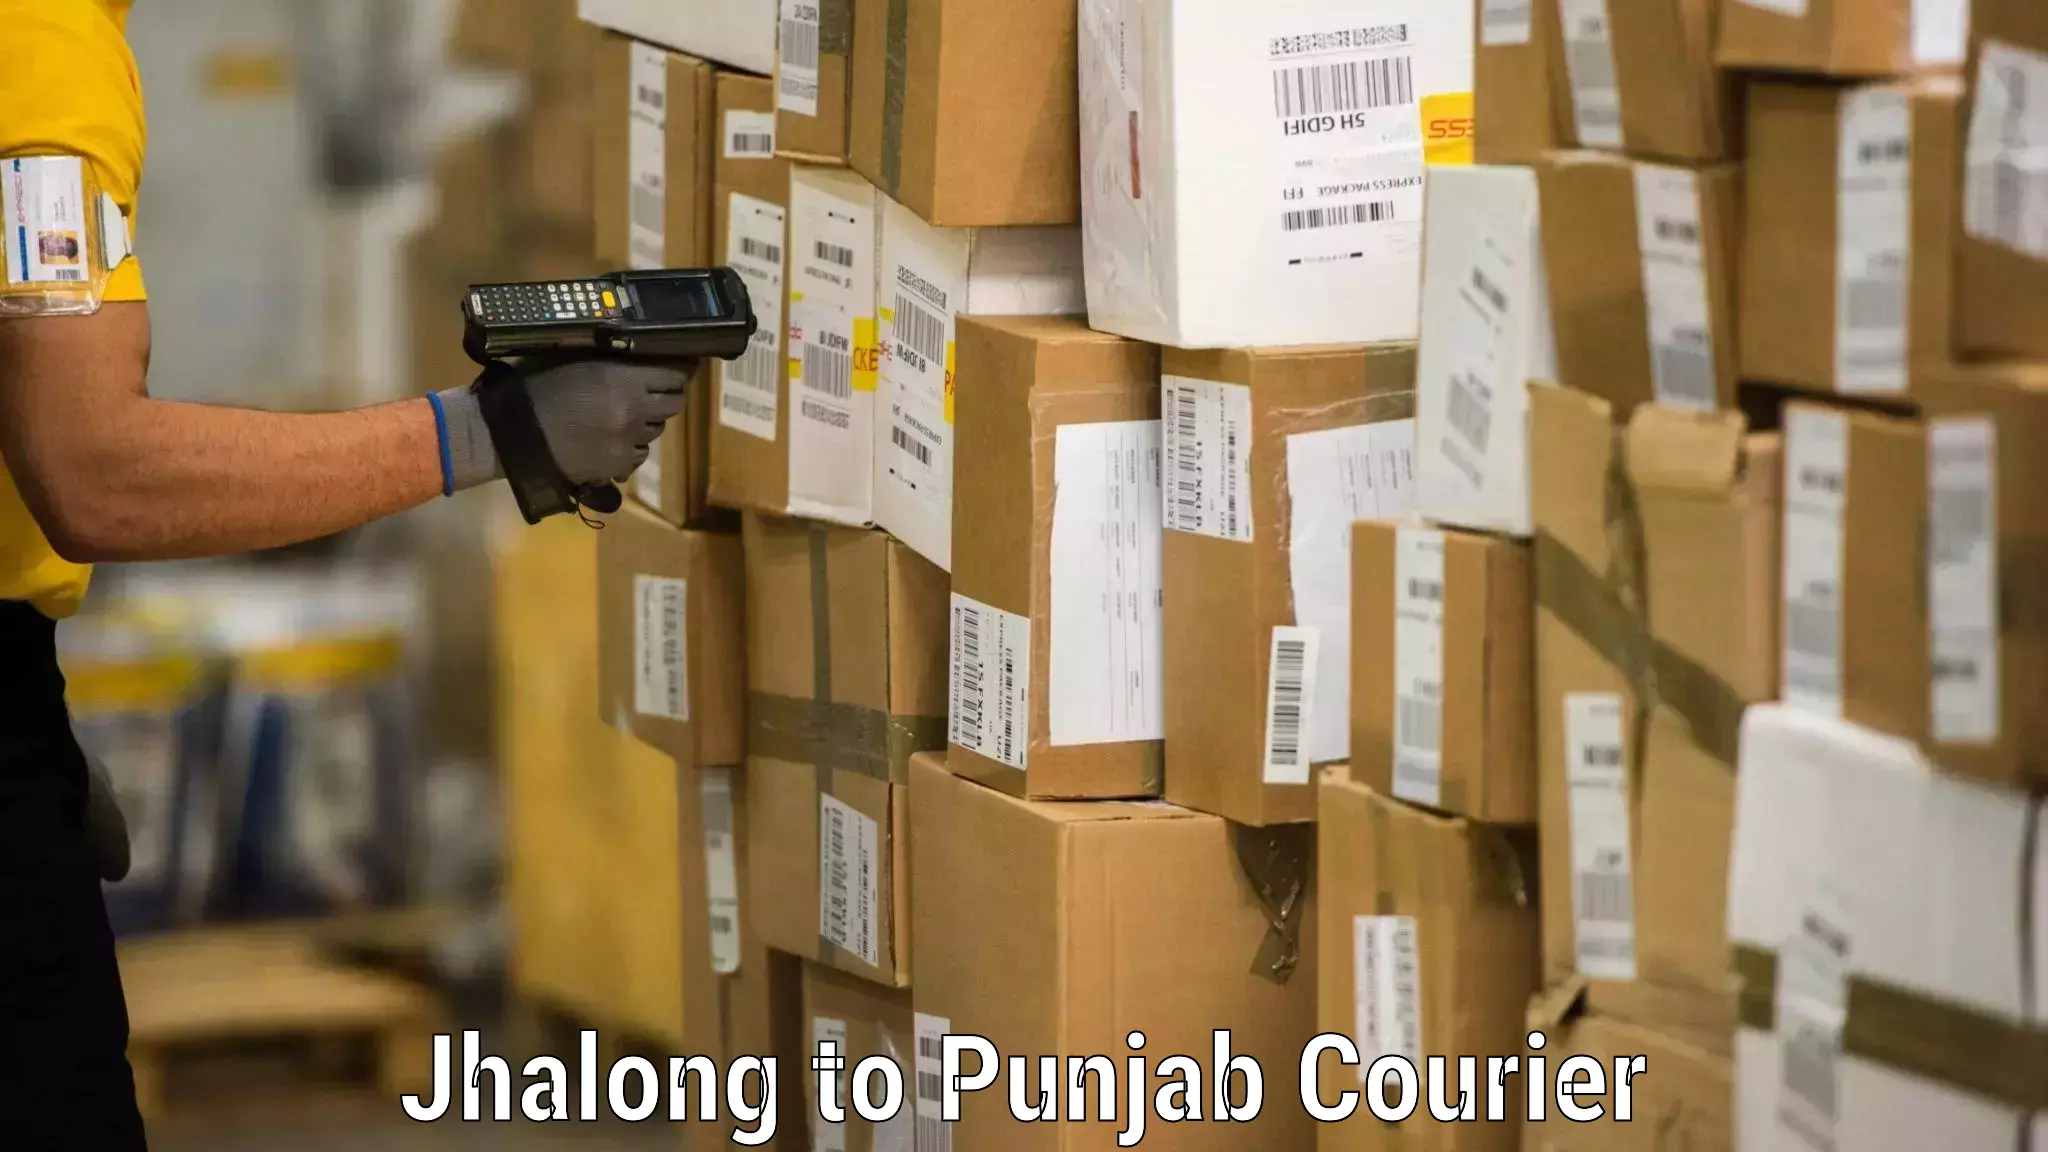 Moving and packing experts Jhalong to Punjab